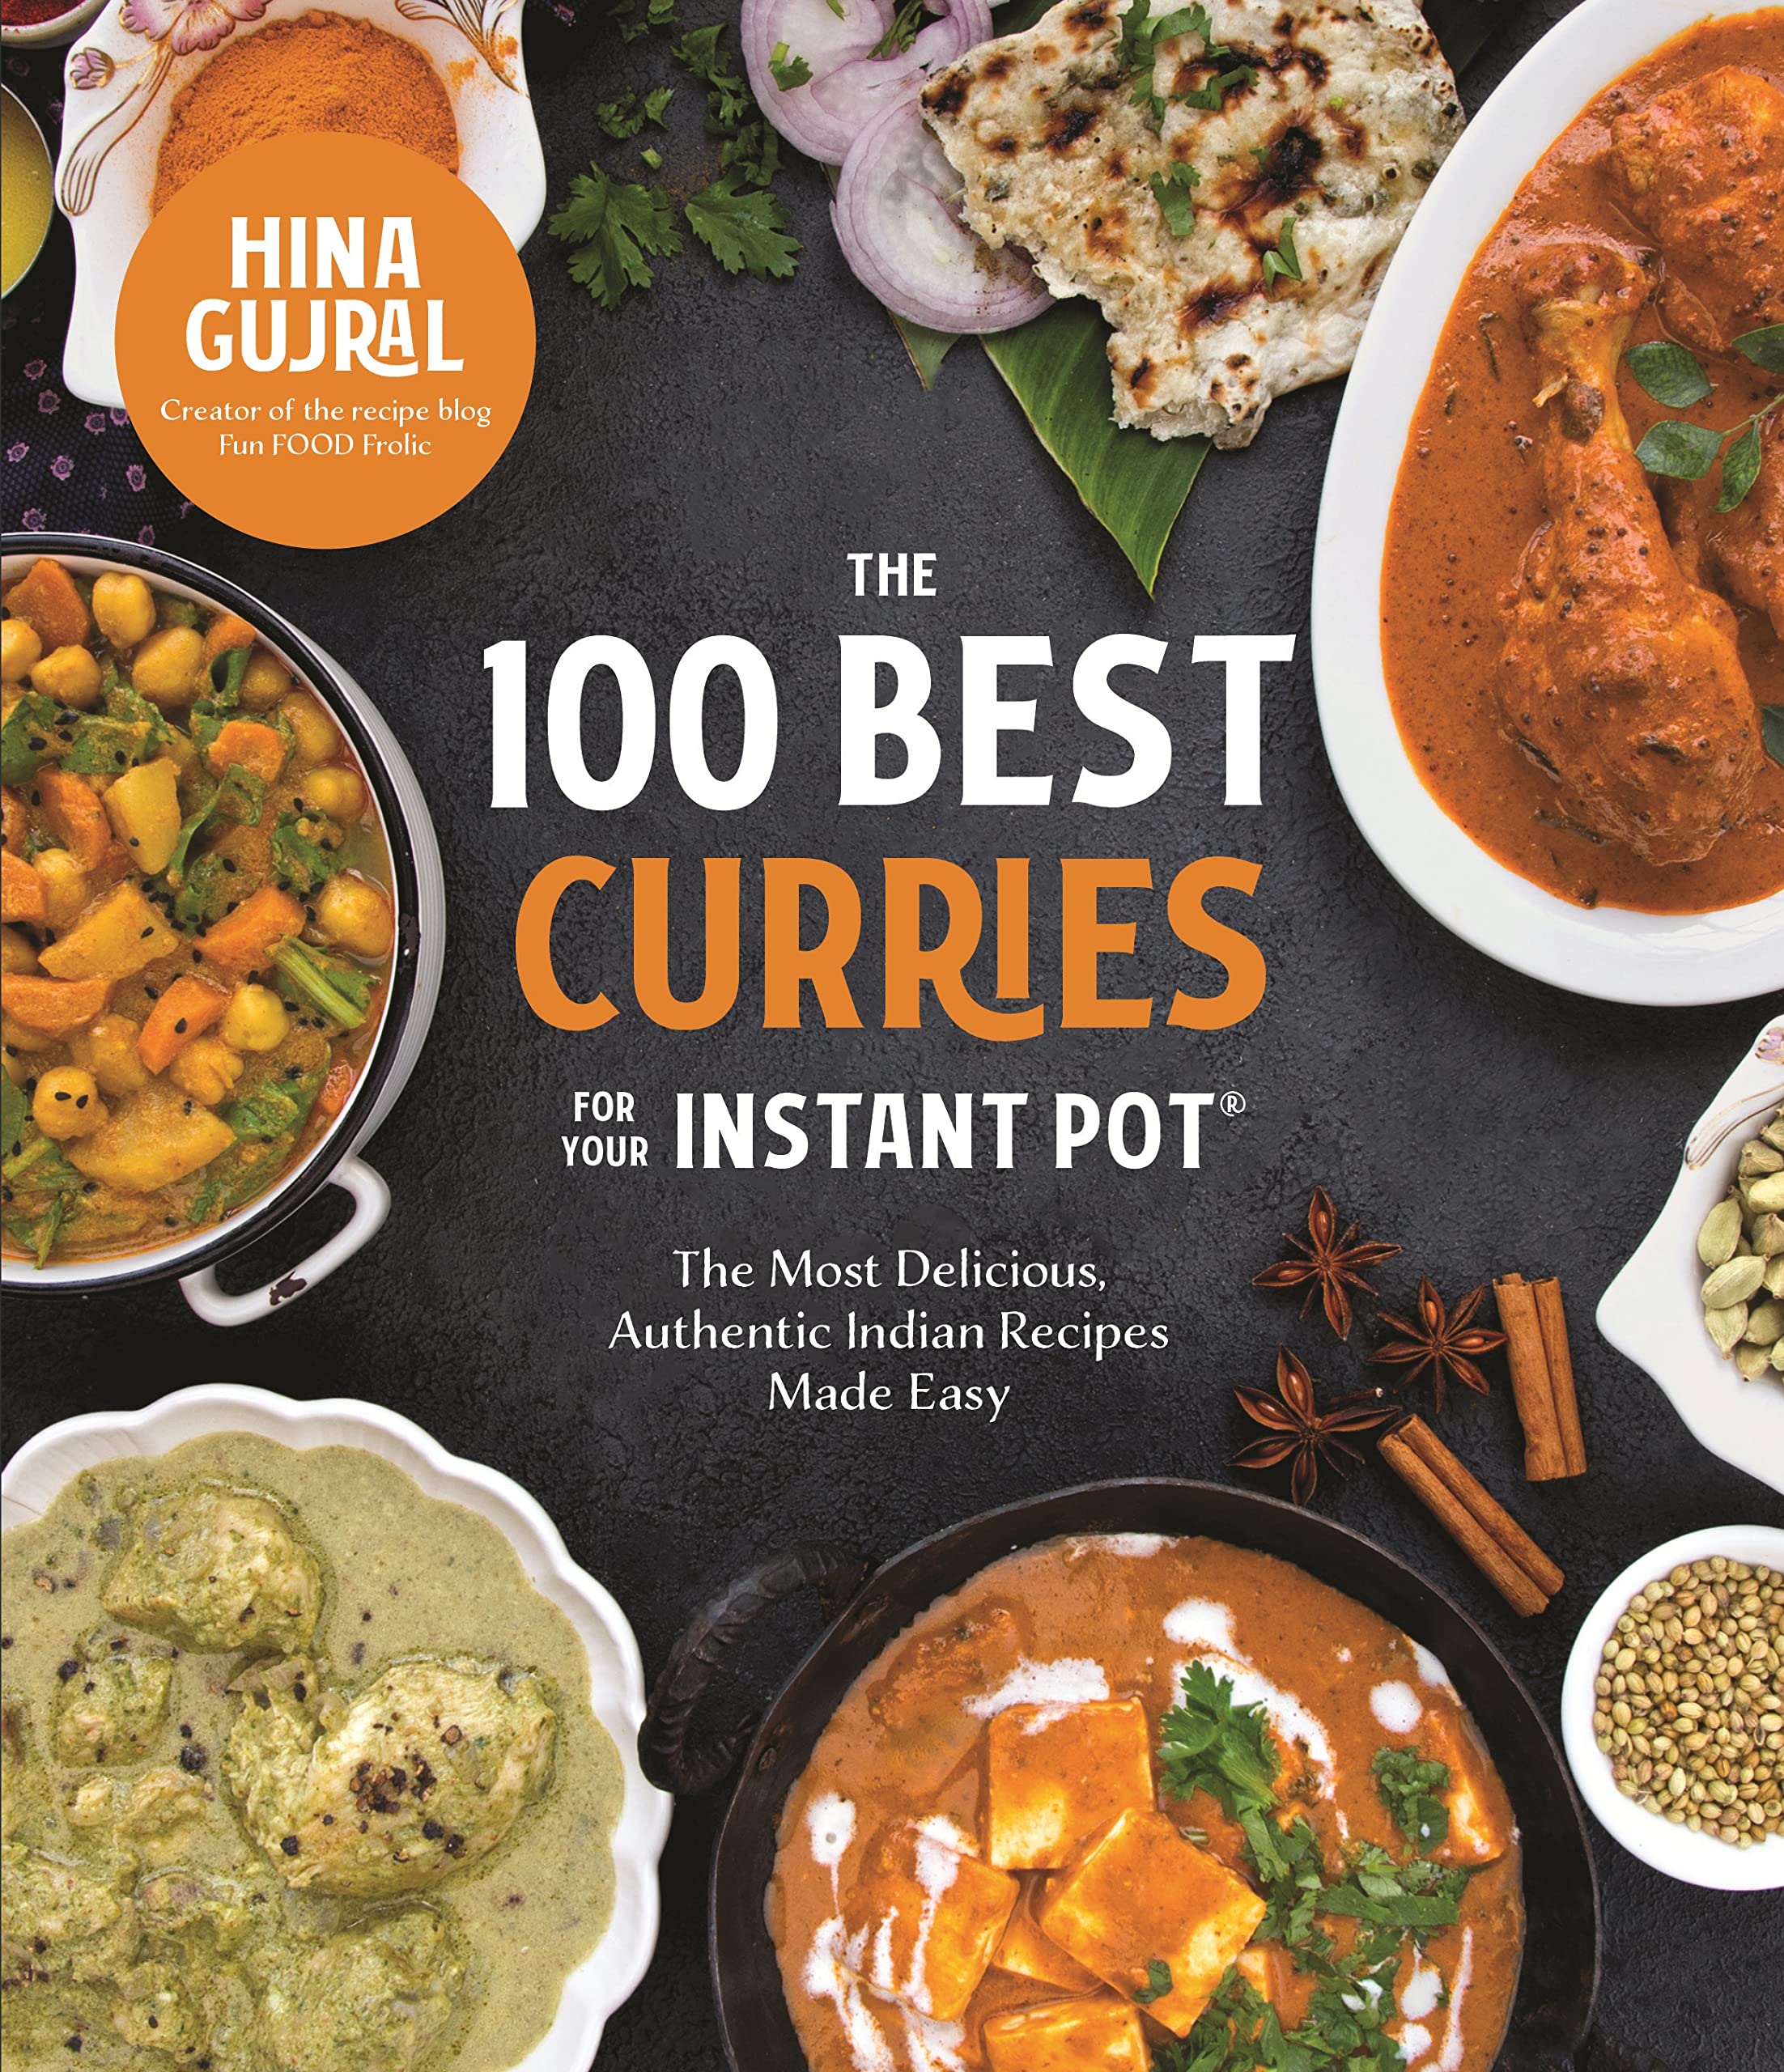 The 100 Best Curries for Your Instant Pot: The Most Delicious, Authentic Indian Recipes Made Easy (Hina Gujral)